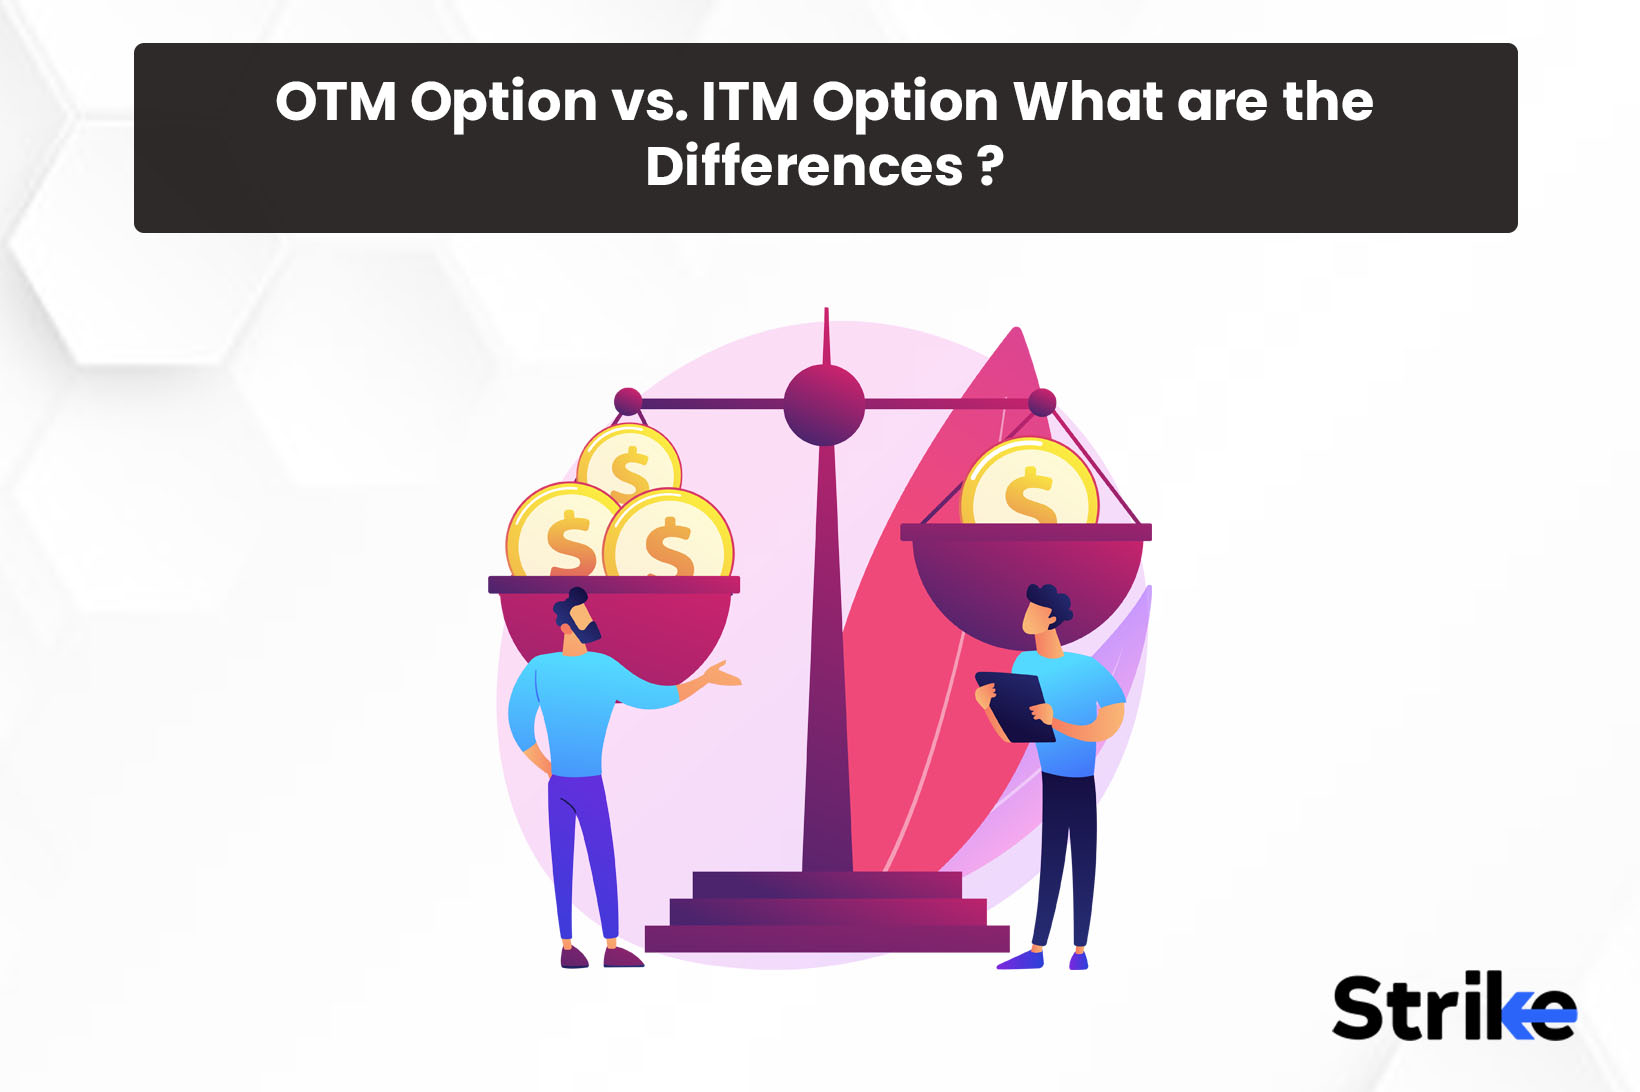 OTM Option vs. ITM Option: What Are the Differences